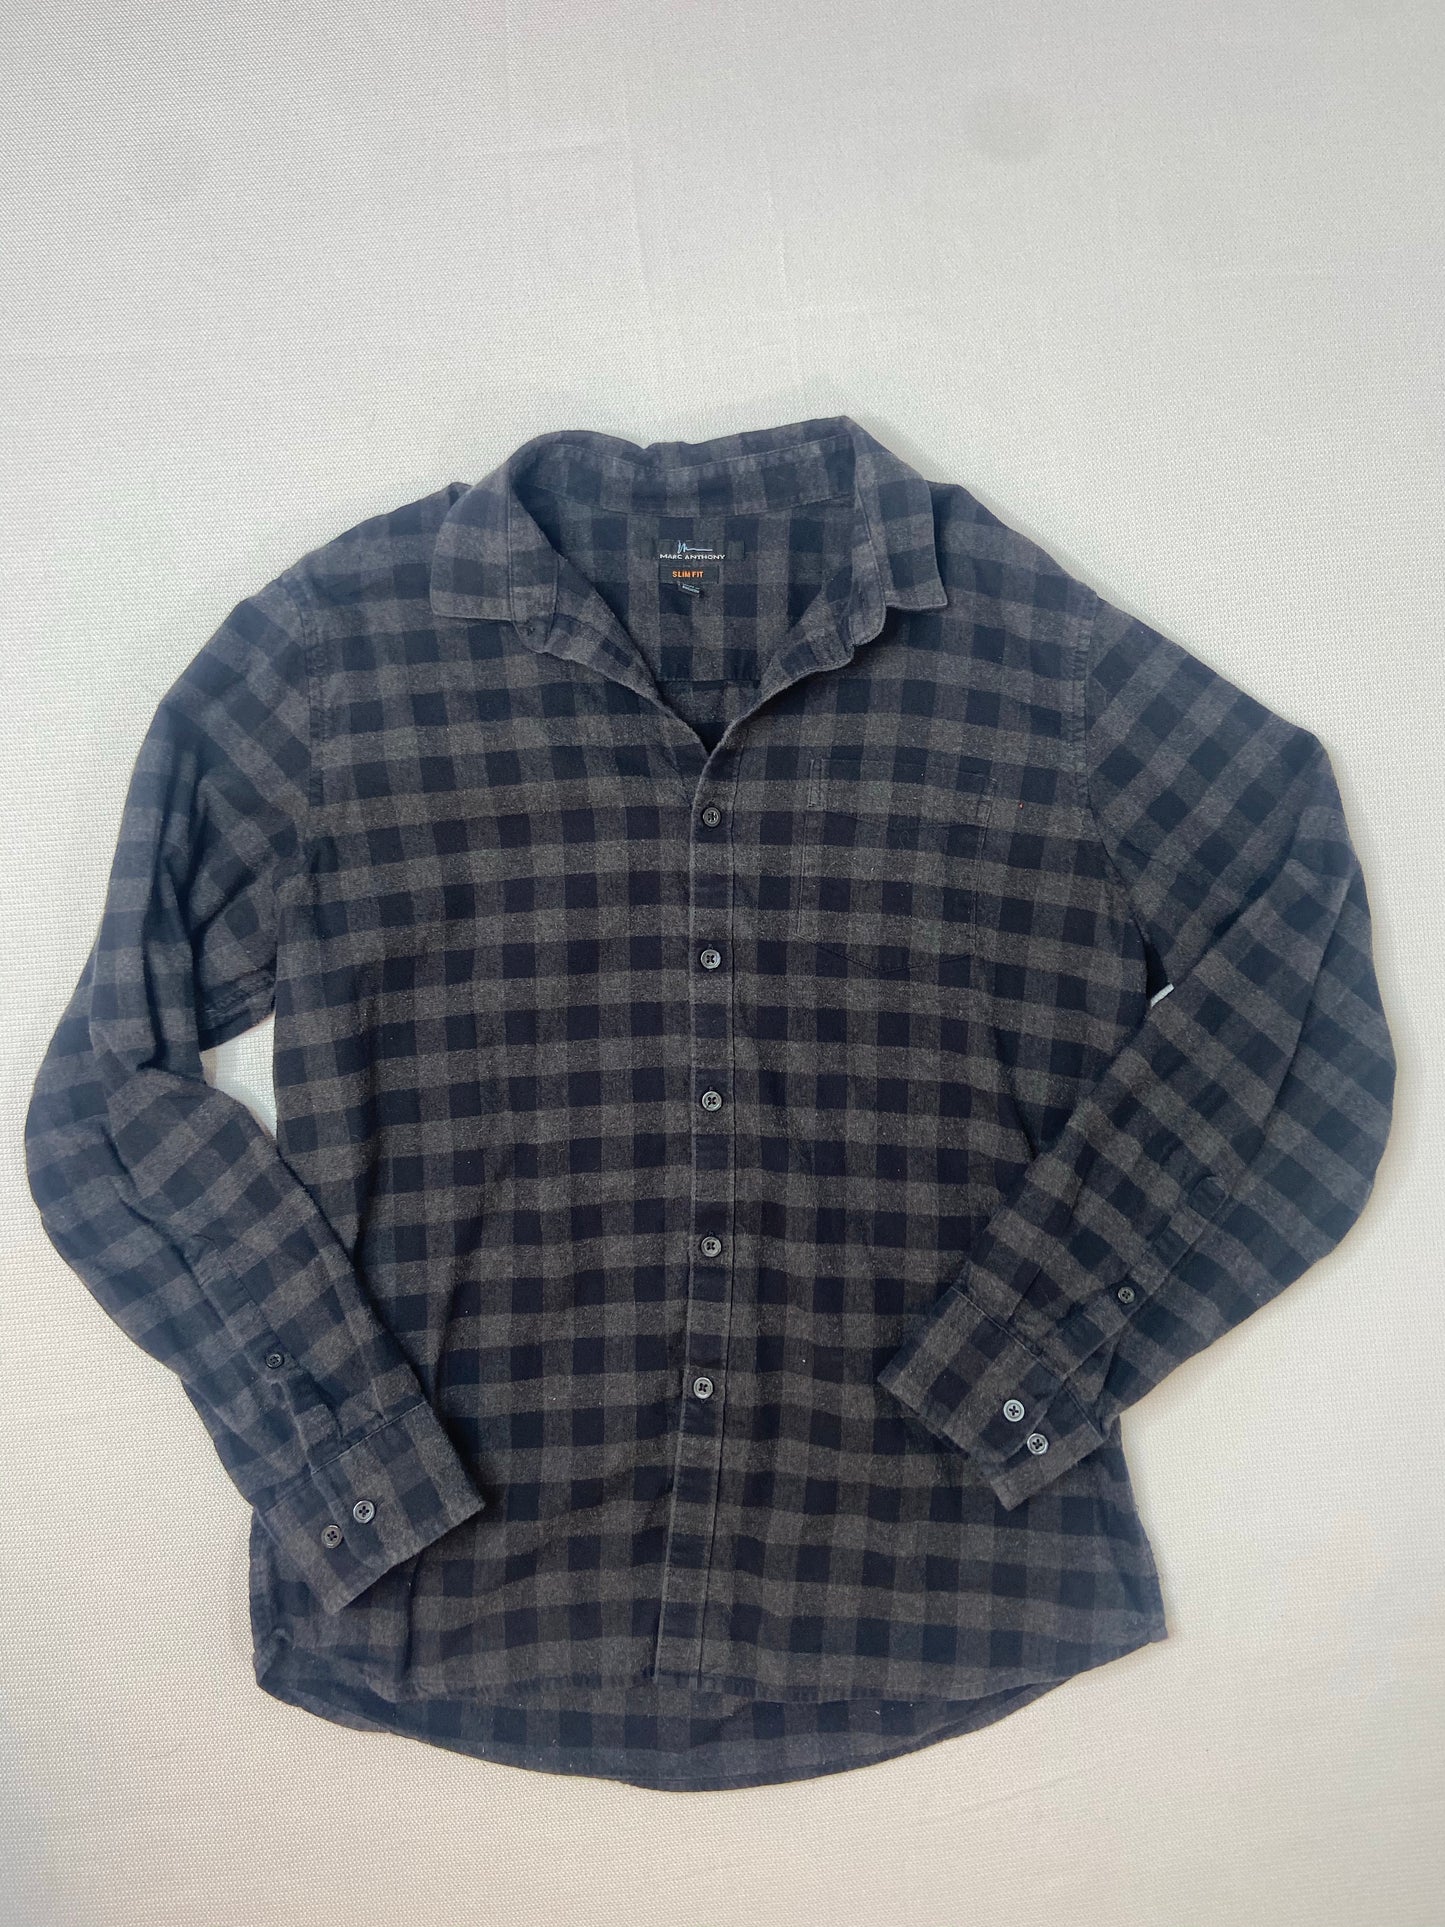 Black and Gray Button up Flannel- Slim Fit L